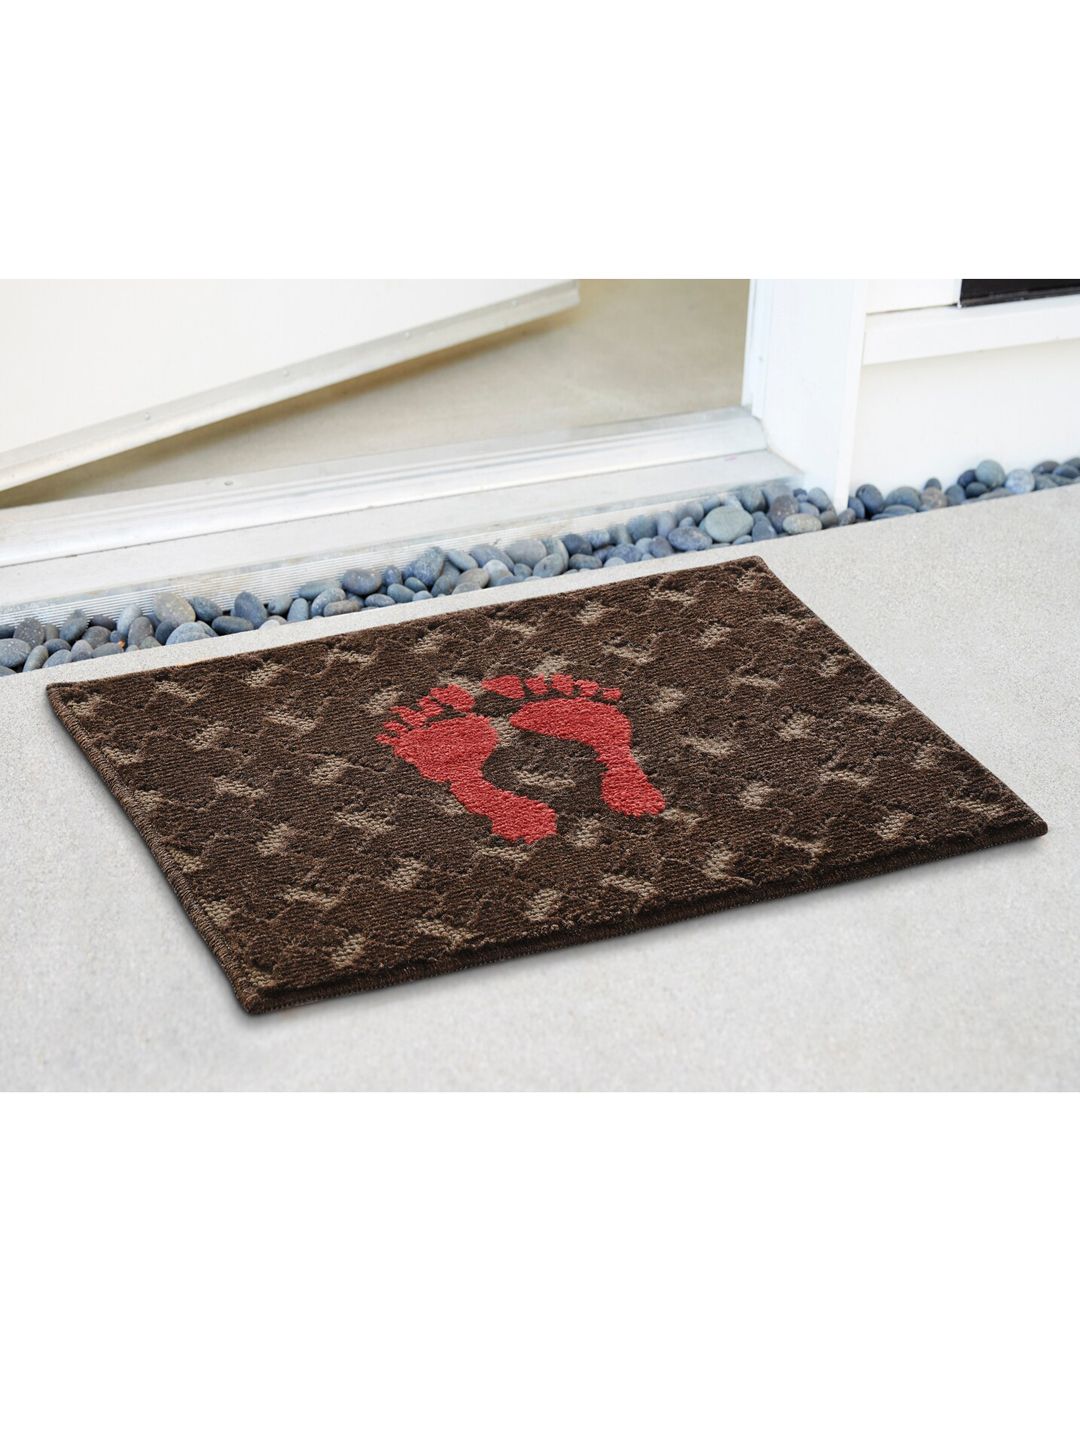 Saral Home Set Of 2 Printed Cotton Anti-Skid Doormats Price in India